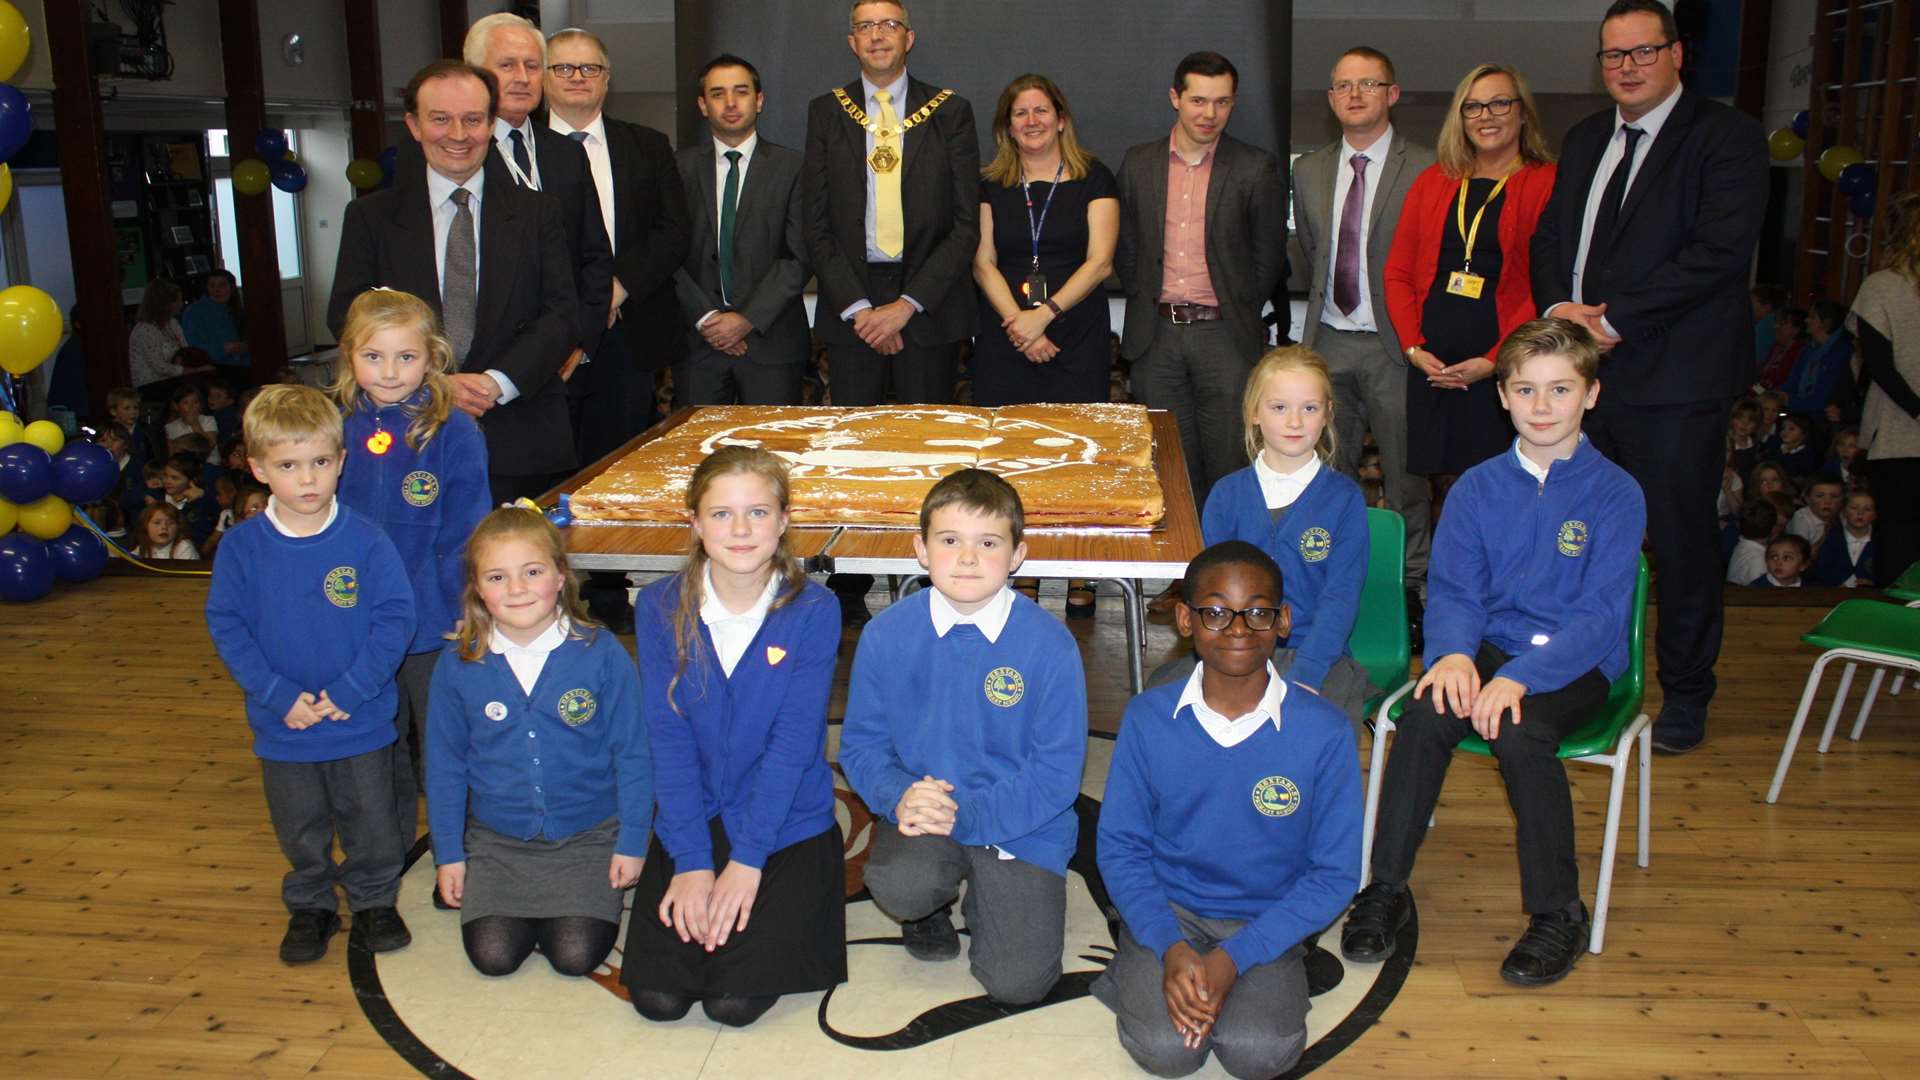 Staff, pupils and some special guests marked a £2.6m makeover at Hextable Primary School with a giant cake